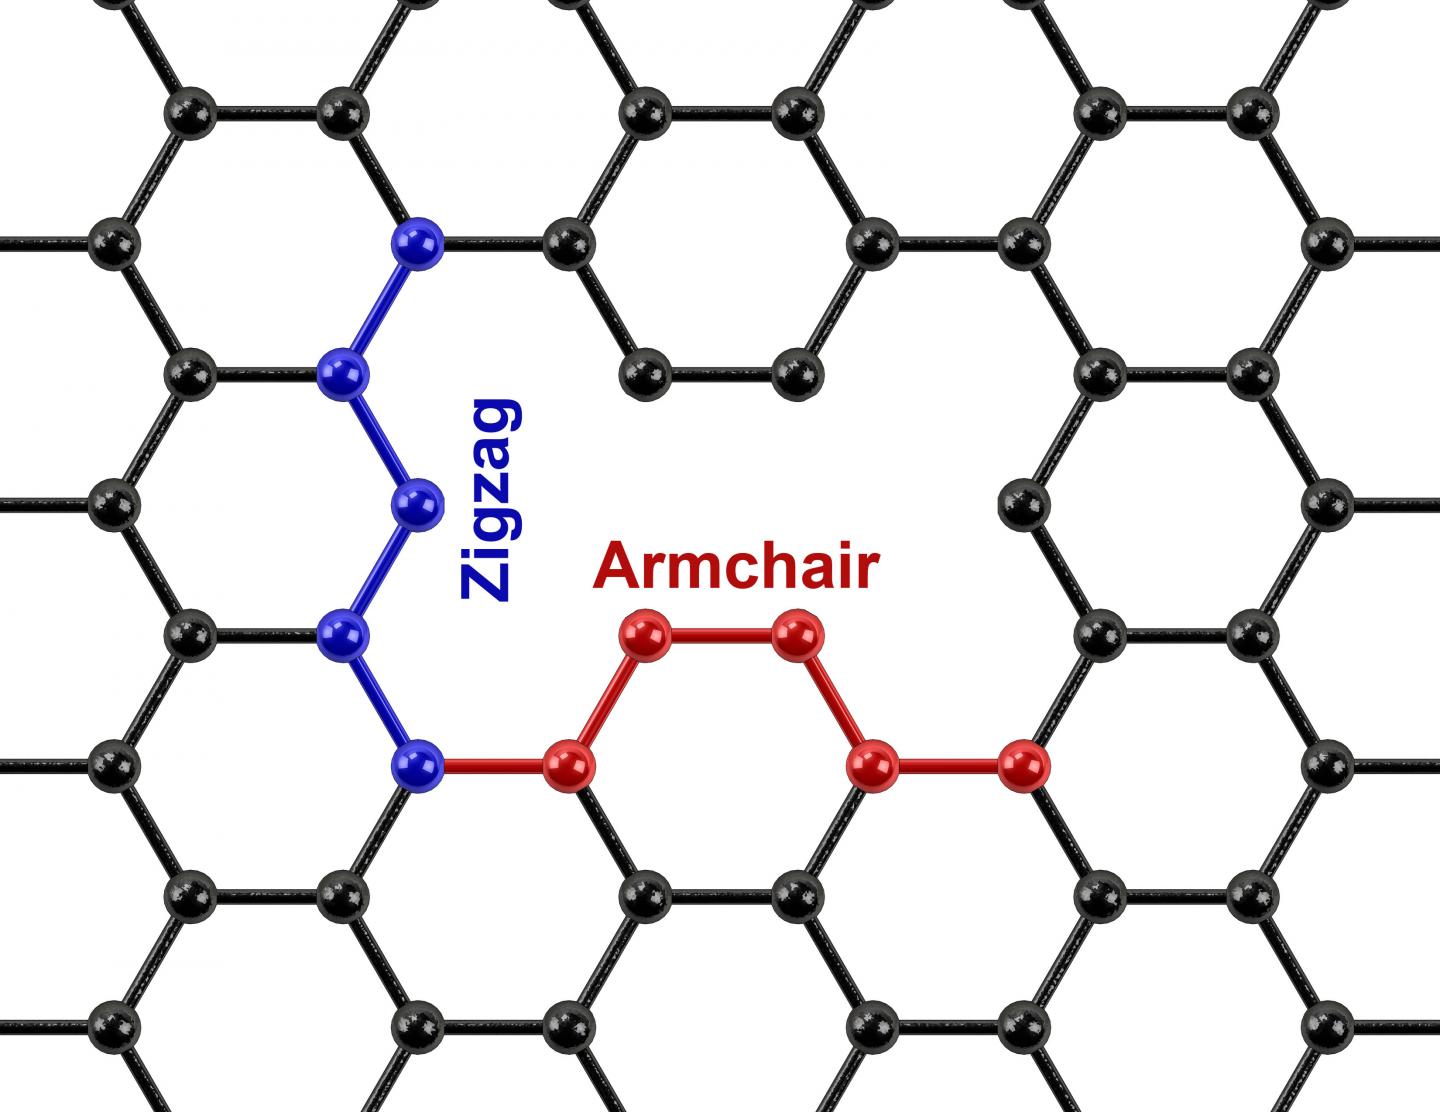 Zigzag and Armchair Defects in Graphene